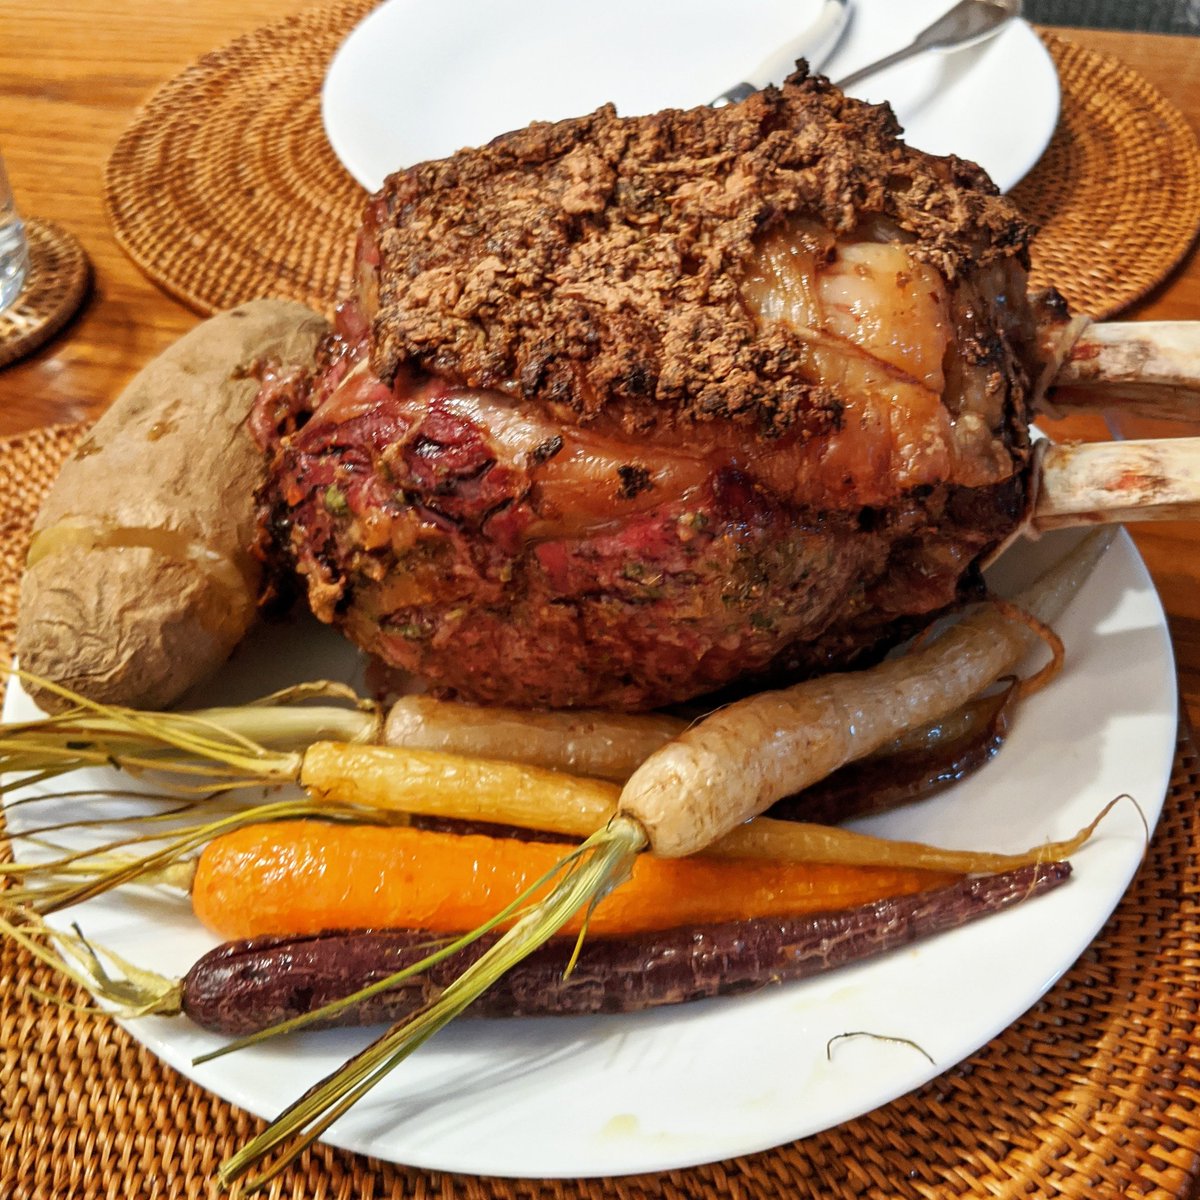 Dry aged standing rib roast for two. So heavenly. 